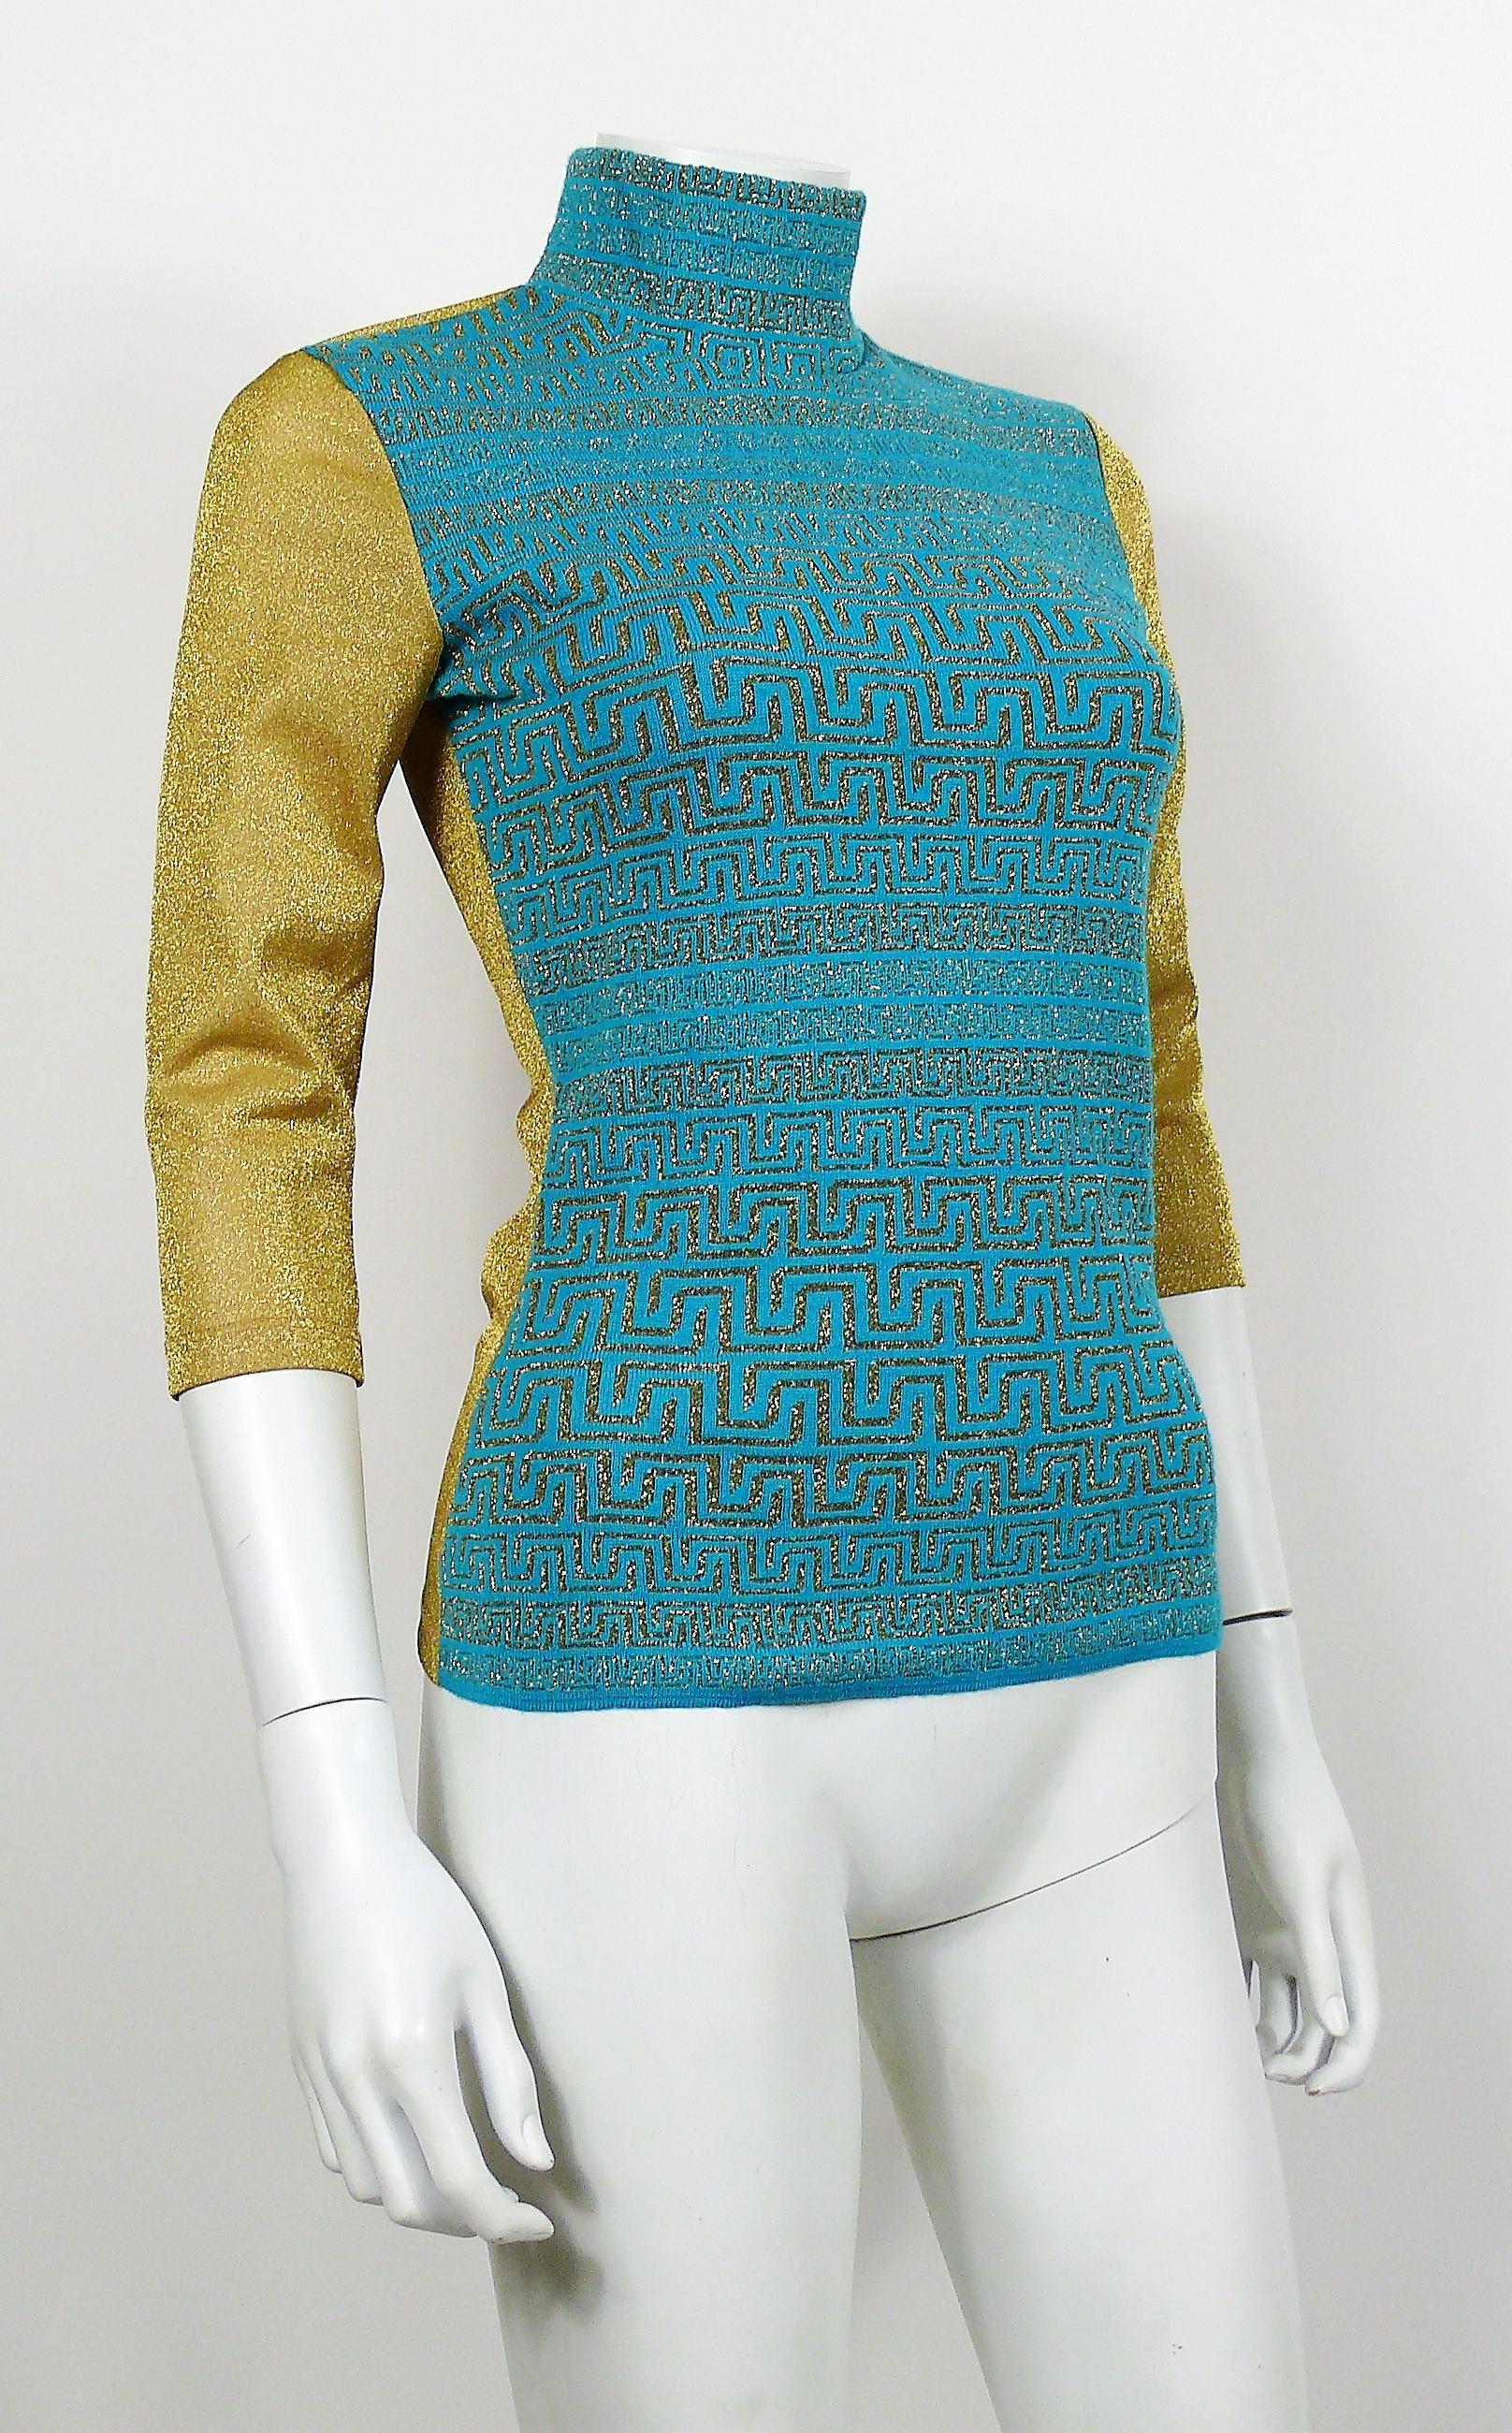 VERSACE JEANS COUTURE vintage blue and gold lurex top featuring an ancient greek pattern.

This top features :
- Blue knitted front with gold lurex ancient greek pattern.
- Gold lurex sleeves and back.
- Turtleneck.
- Elbow length sleeves.

Label